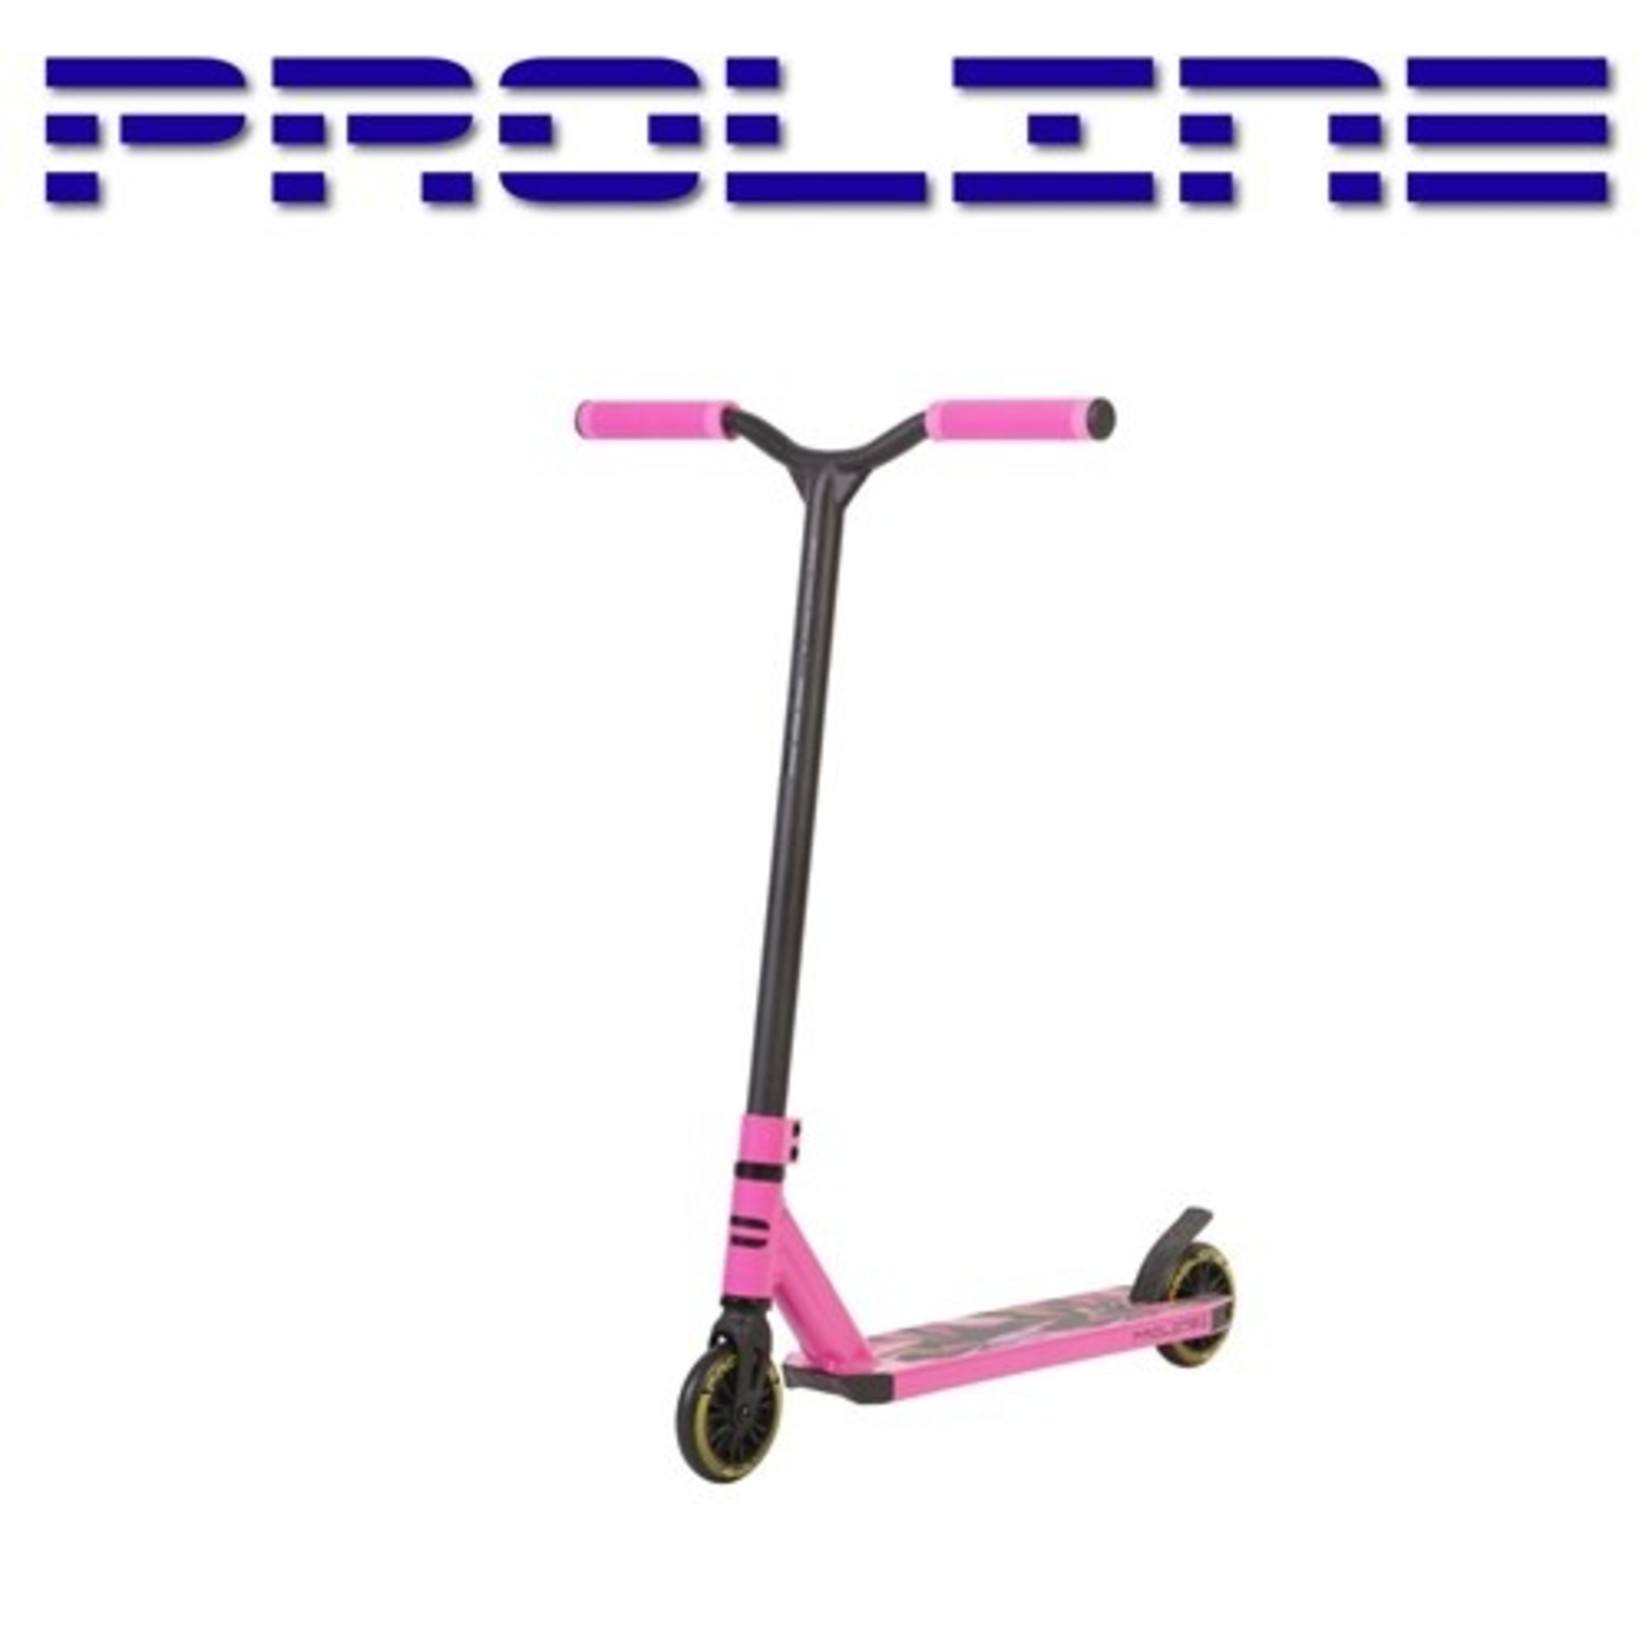 Proline Kids Scooter 5+ Years Pink L1 Series 